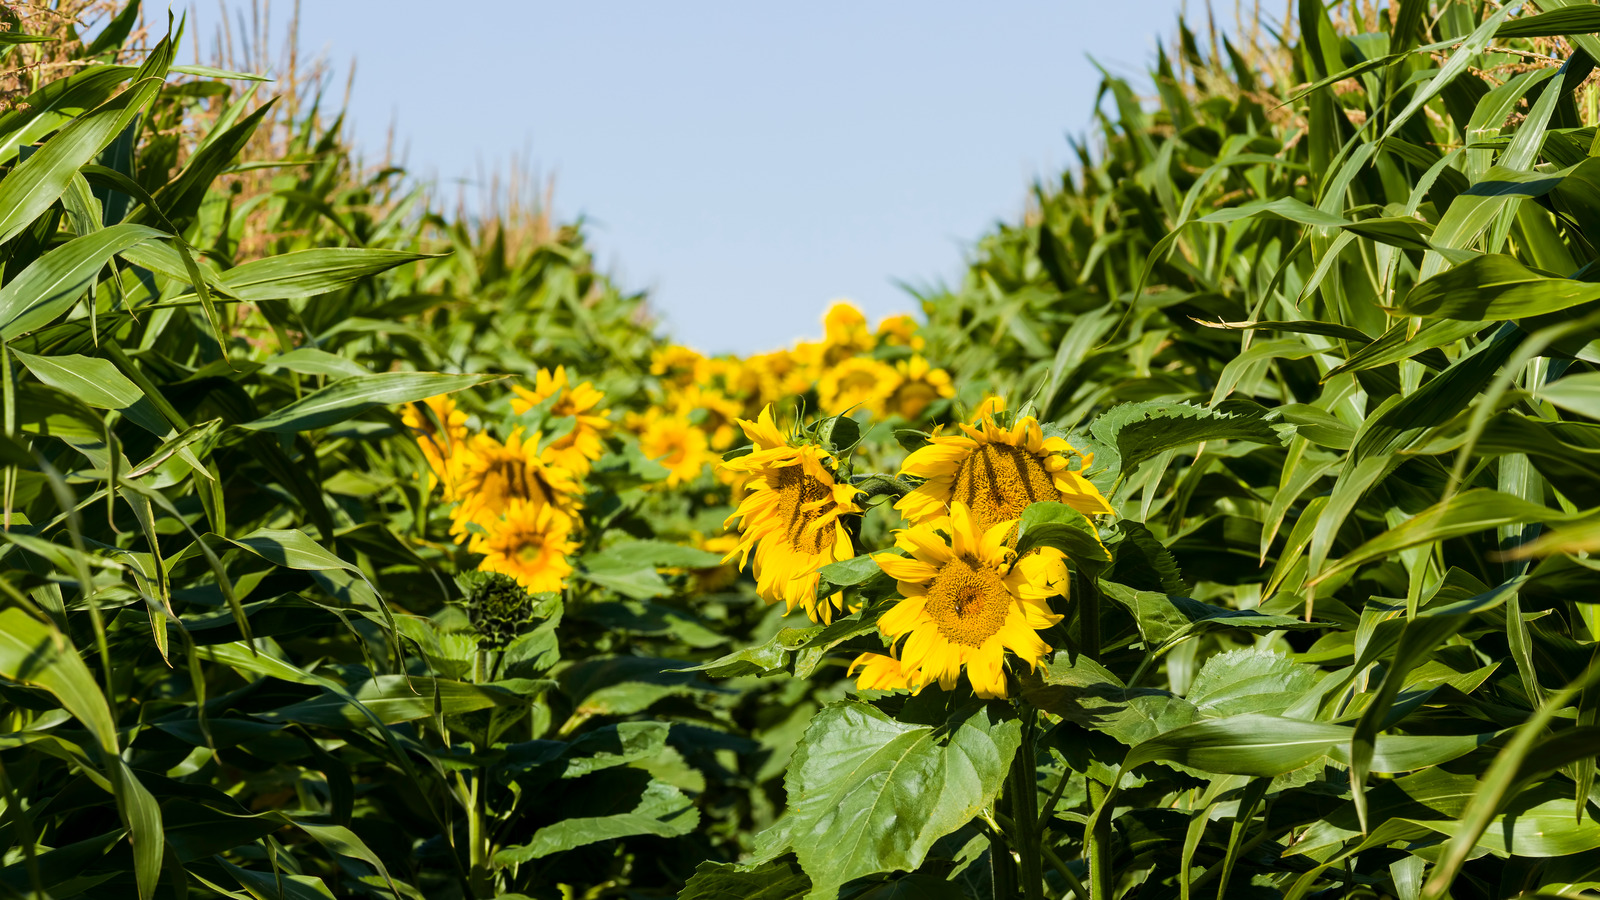 Image of Planting corn and sunflowers together image 2